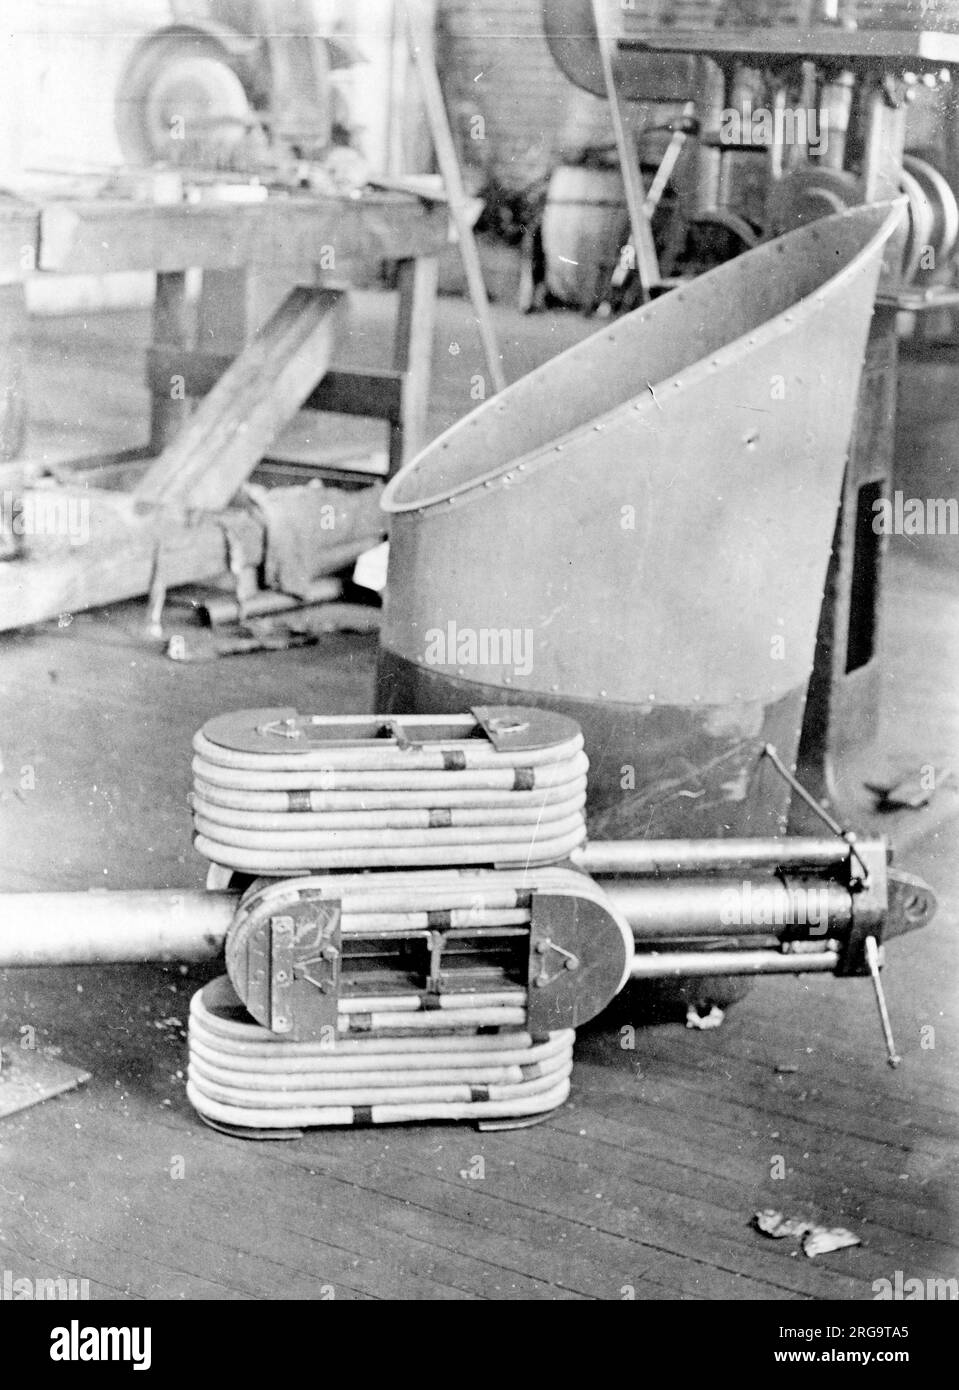 Main undercarriage unit bungee shock absorber of Engineering Division XNBL-1 AS64215, (also known as The Barling Bomber and Witteman-Lewis XNBL-1 and McCook Field Project P-303), during manufacture at Witteman-Lewis Co. Designed by Walter Barling, the XNBL-1 (NBL=Night Bombardment-Long distance) was a large triplane, powered by six 420hp Liberty L-12 engines, quad landing gear and four tails. Contracted to Witteman-Lewis Co for manufacture at Hasbrouck Heights, it was shipped by train, unsassembled, in sections, to Wright Field. First flown on 22 August 1923, it was only a few times before it Stock Photo